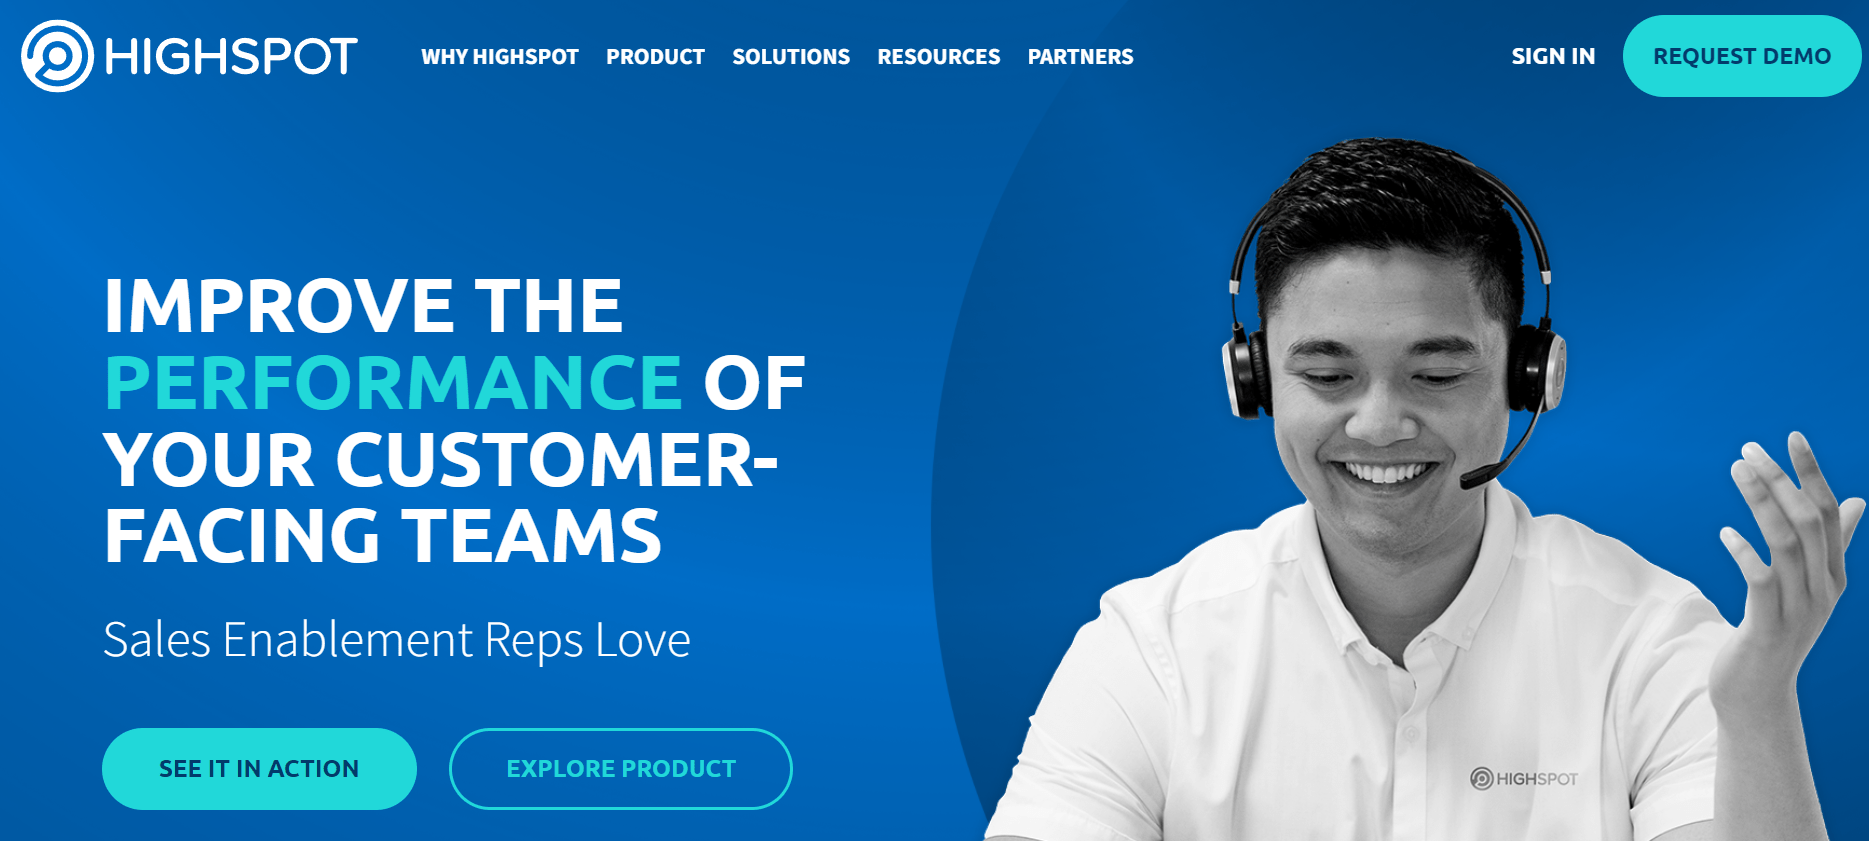 Highspot homepage: Improve the performance of your customer-facing teams